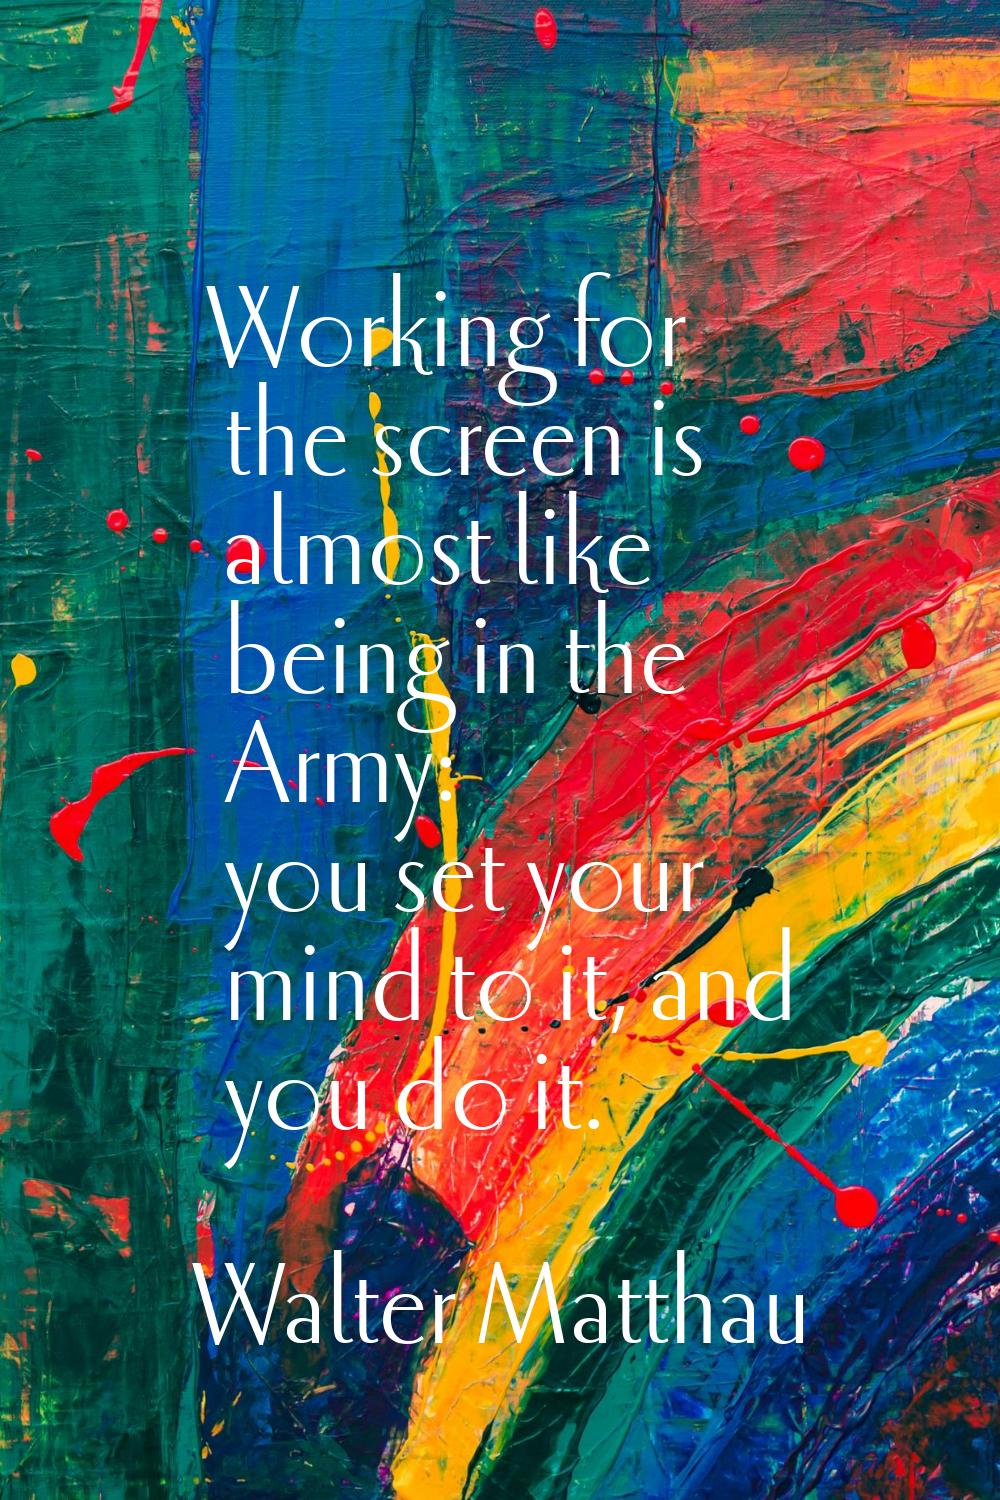 Working for the screen is almost like being in the Army: you set your mind to it, and you do it.